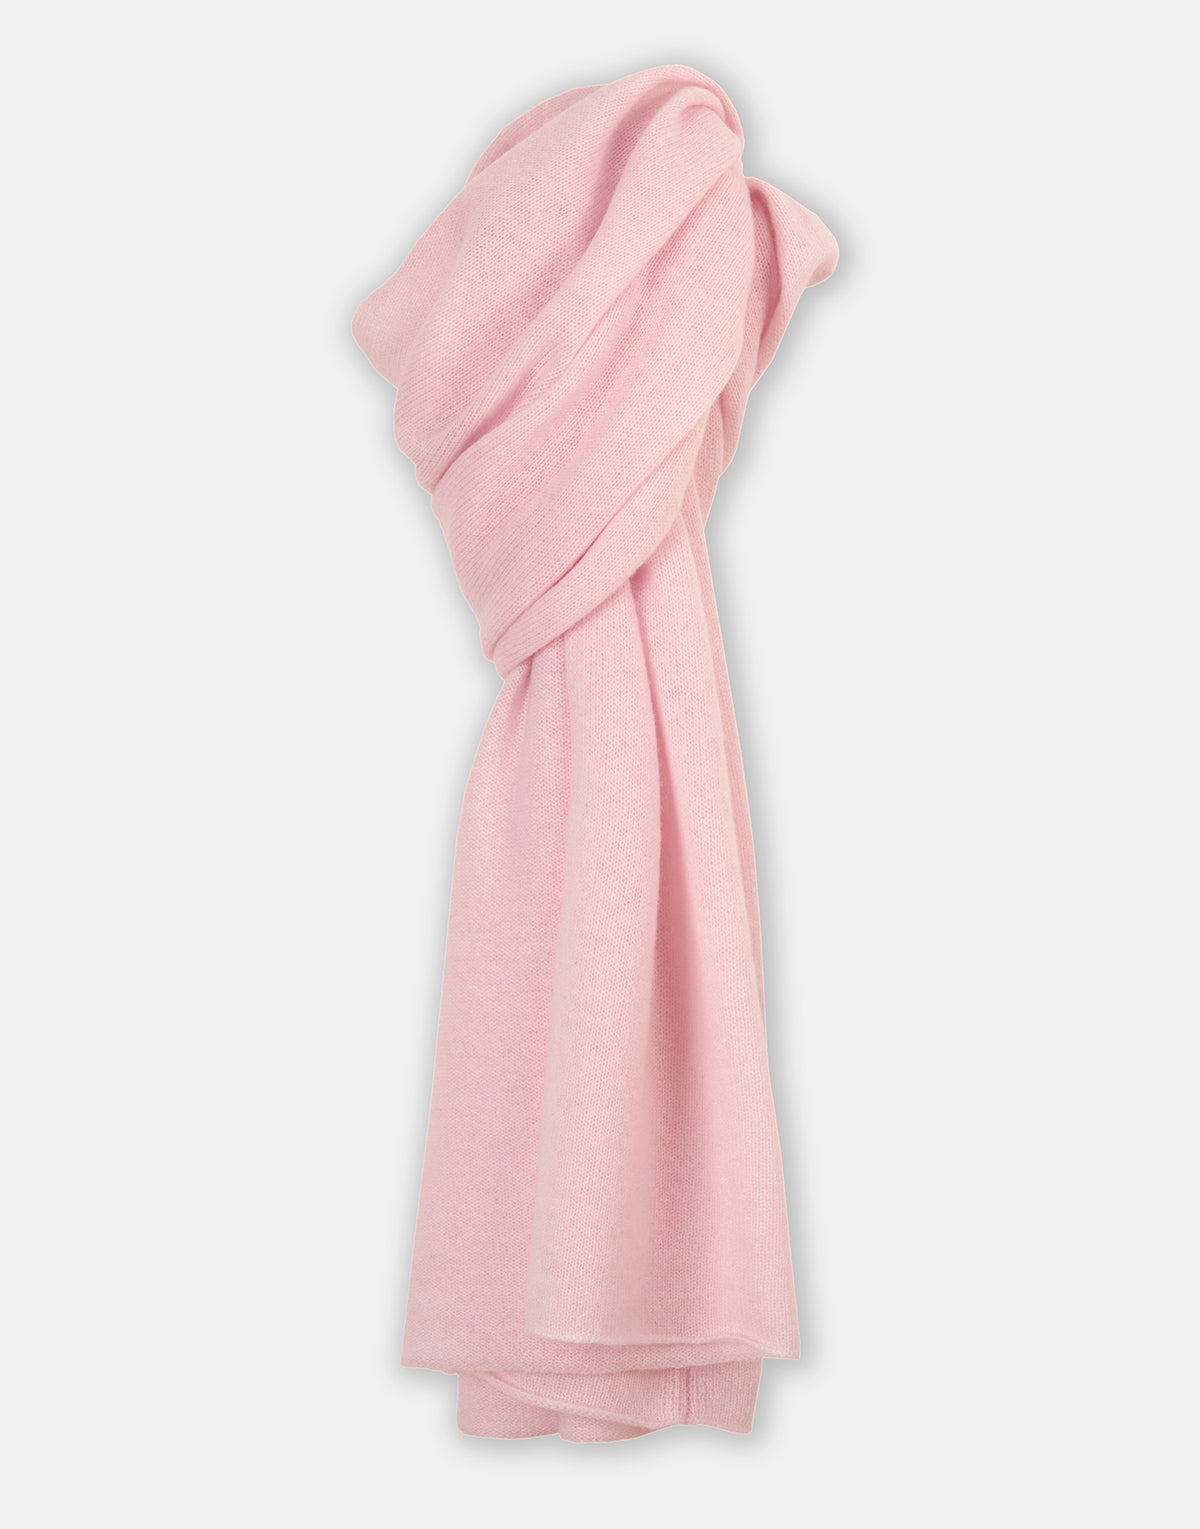 lucy 4-way cashmere poncho - soft pink